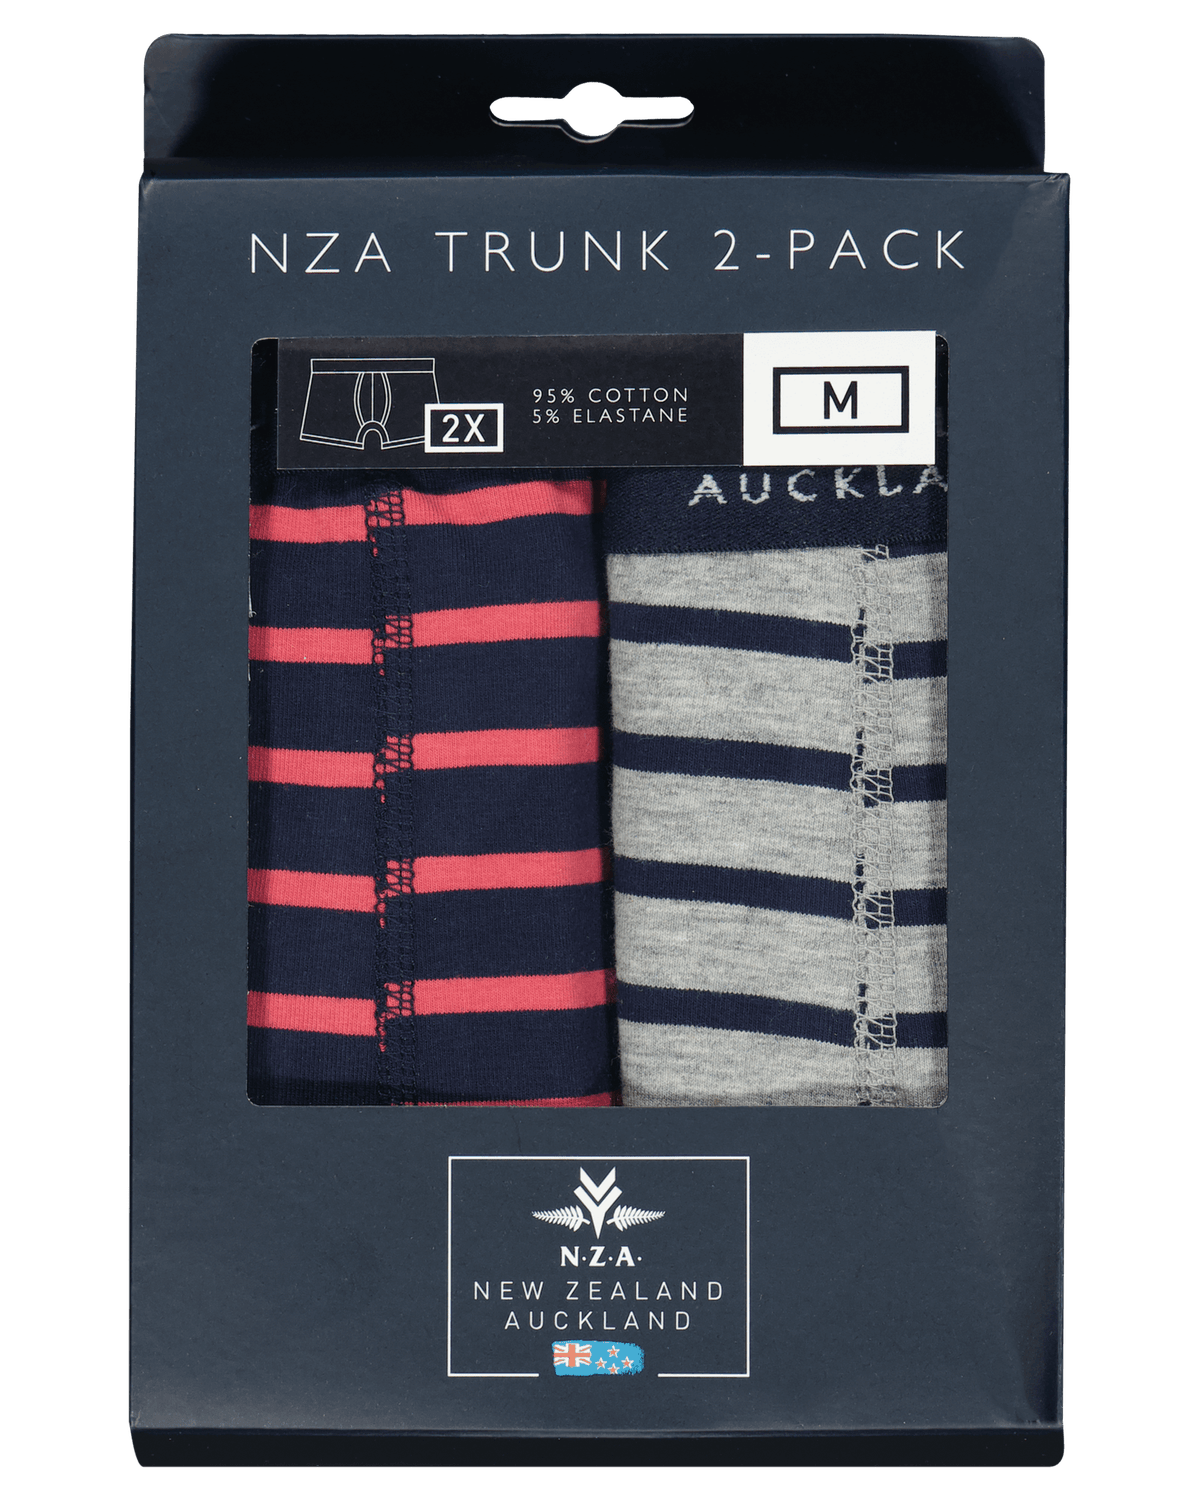 2 pack chaussettes – Mixed color